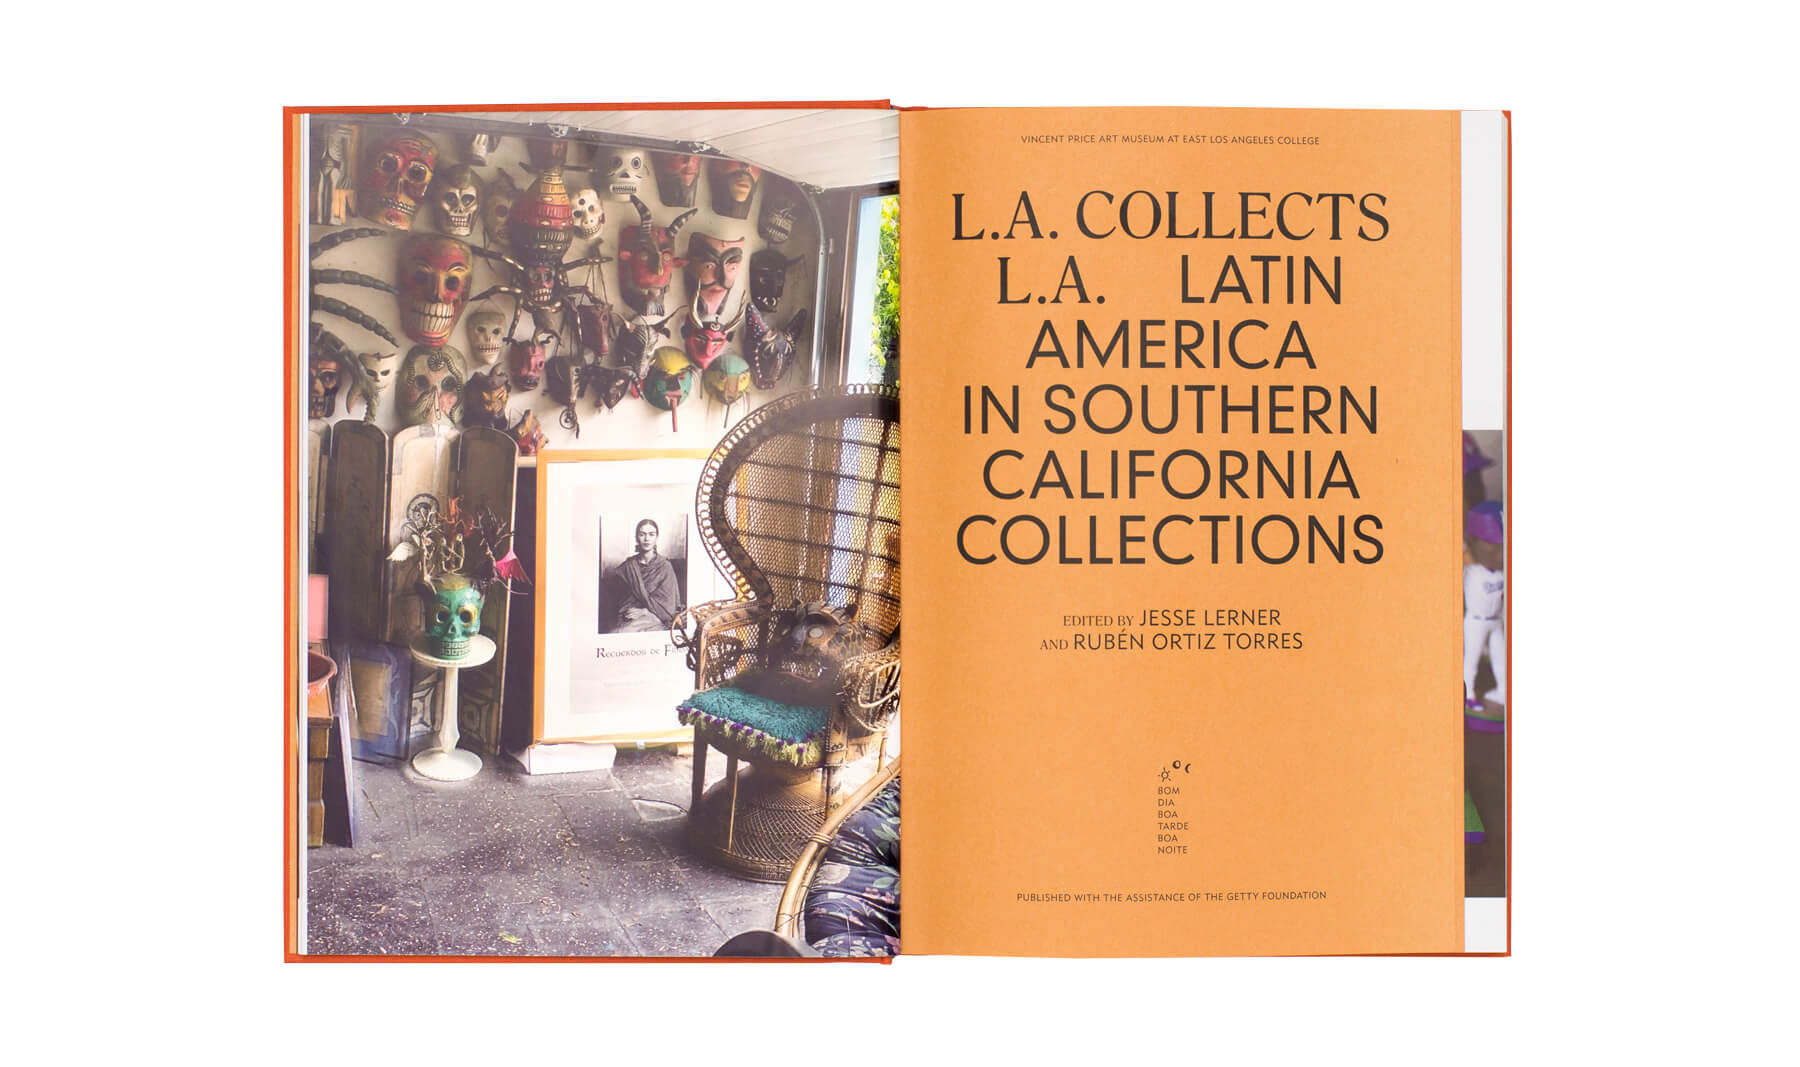 Product image of L.A. collects L.A. – Latin America in Southern California Collections